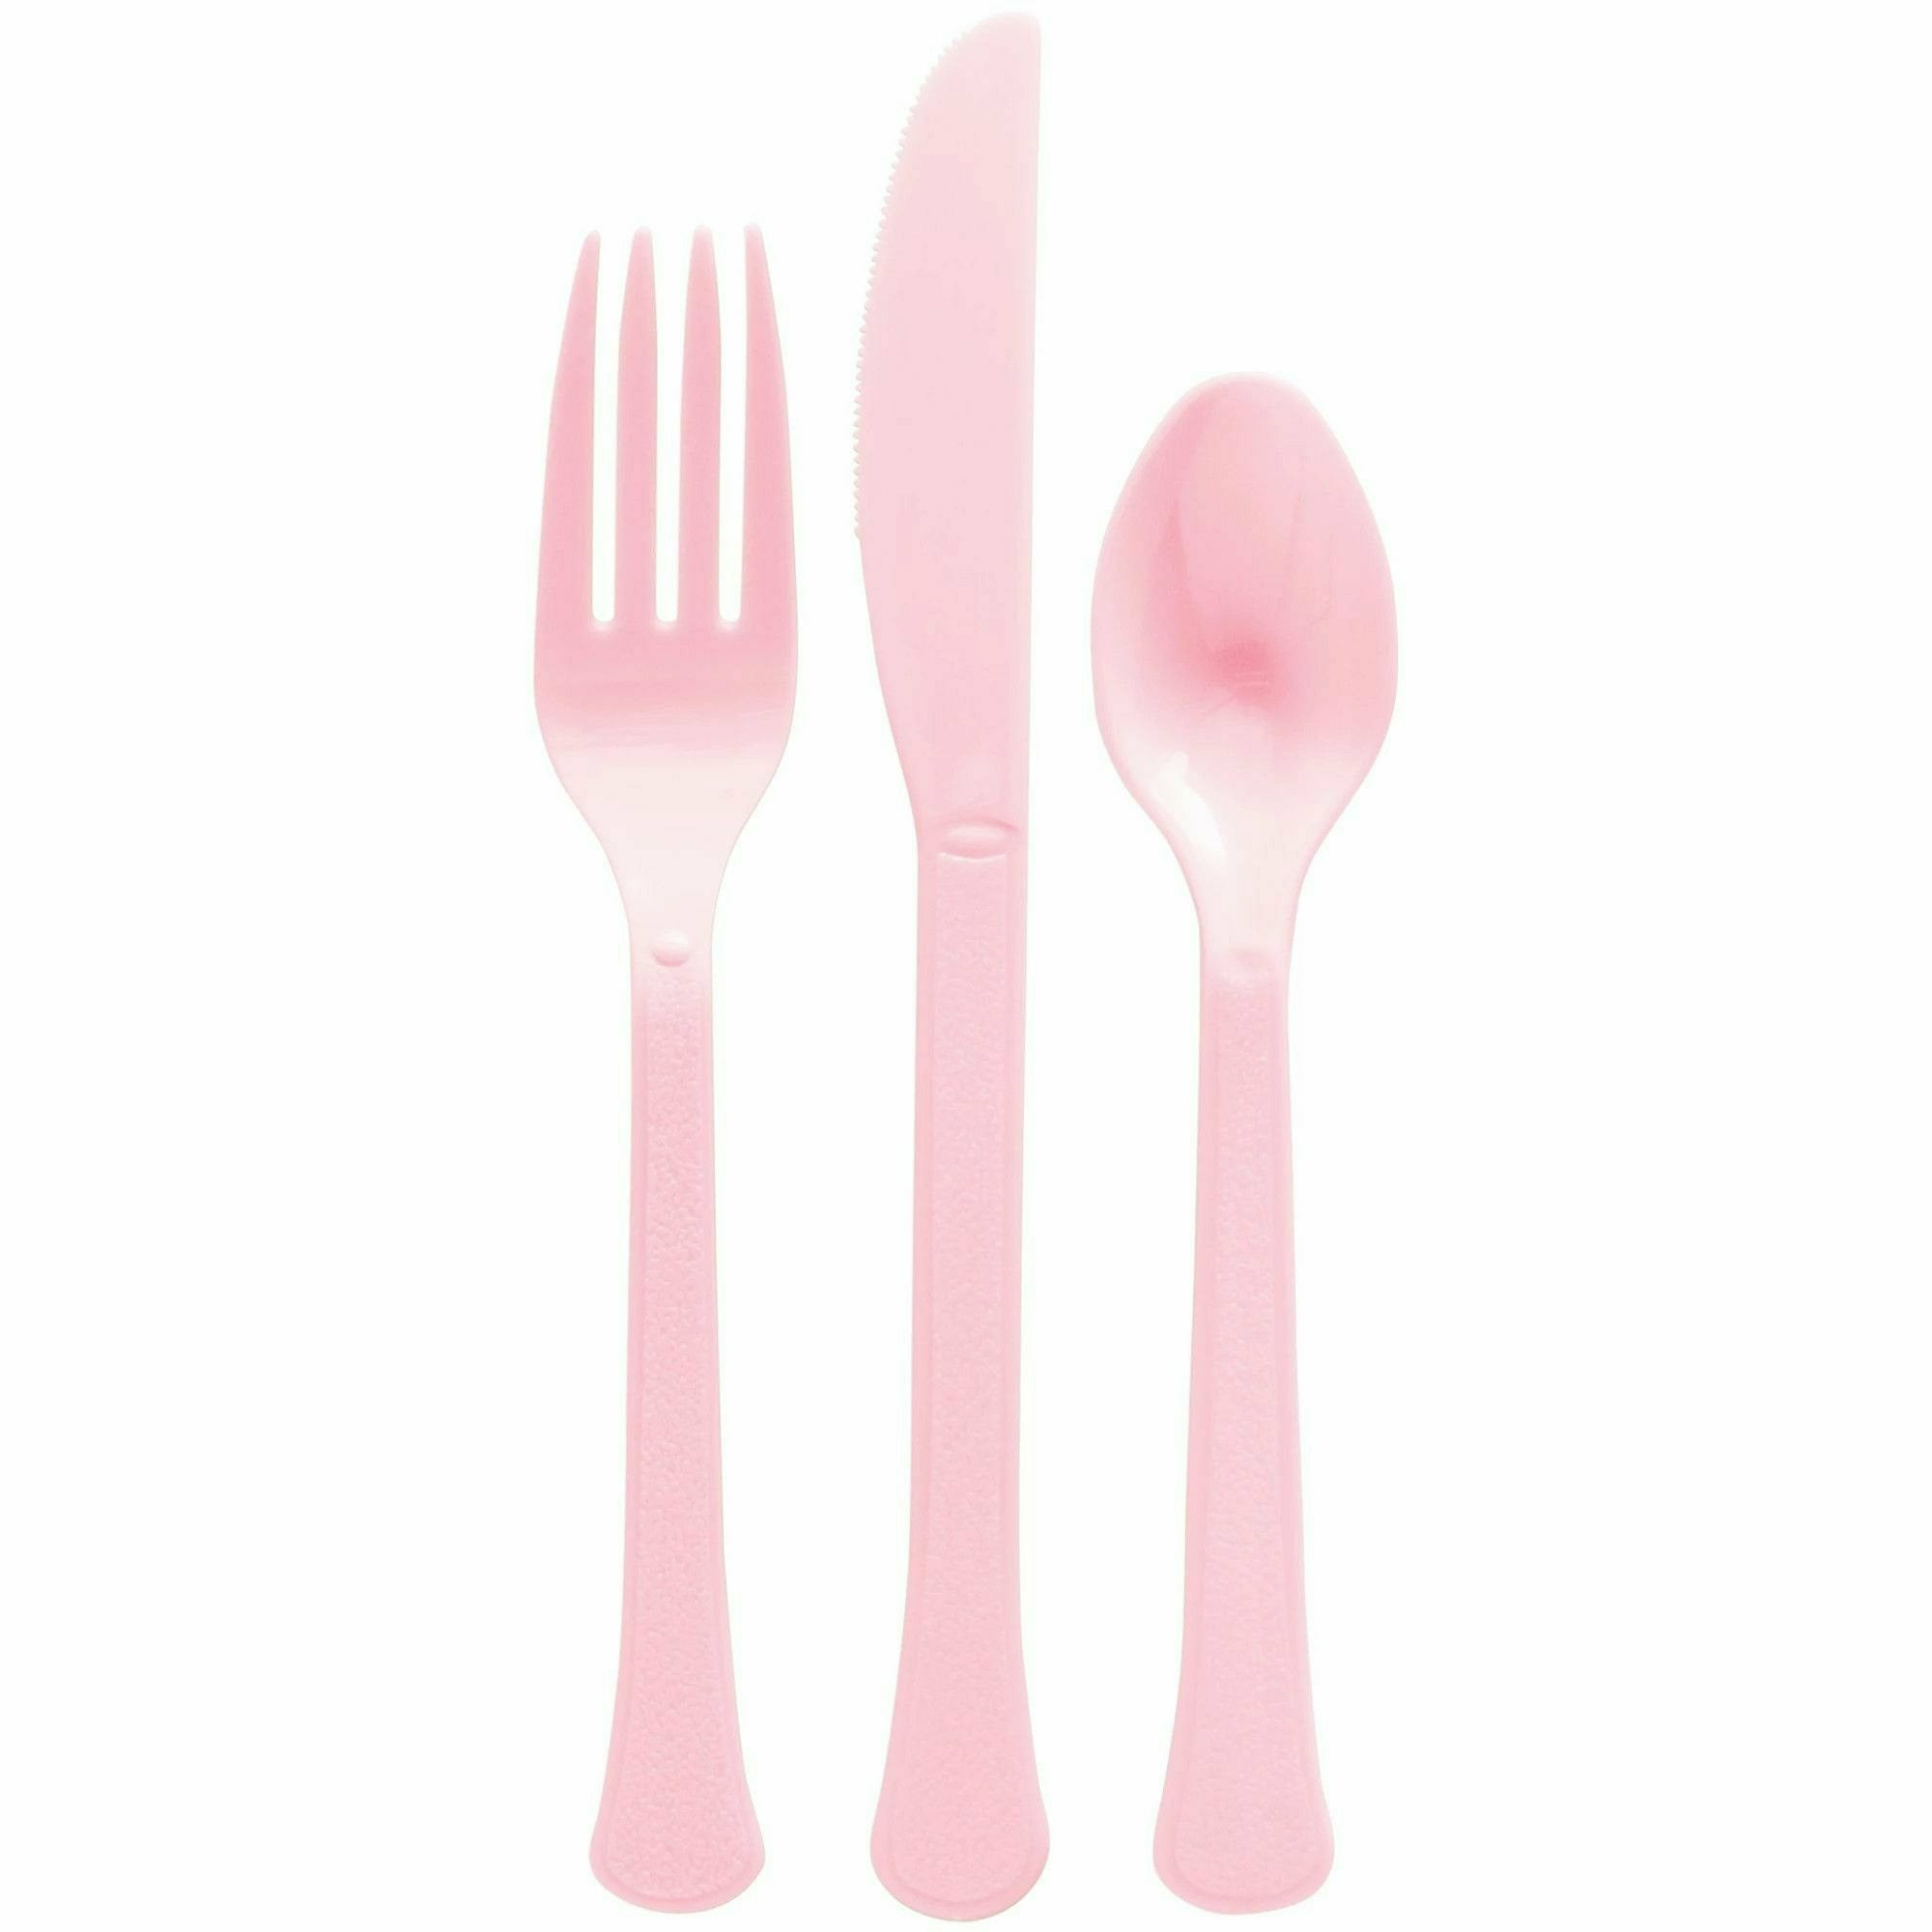 Amscan BASIC New Pink - Boxed, Heavy Weight Cutlery Asst., 80 Ct.